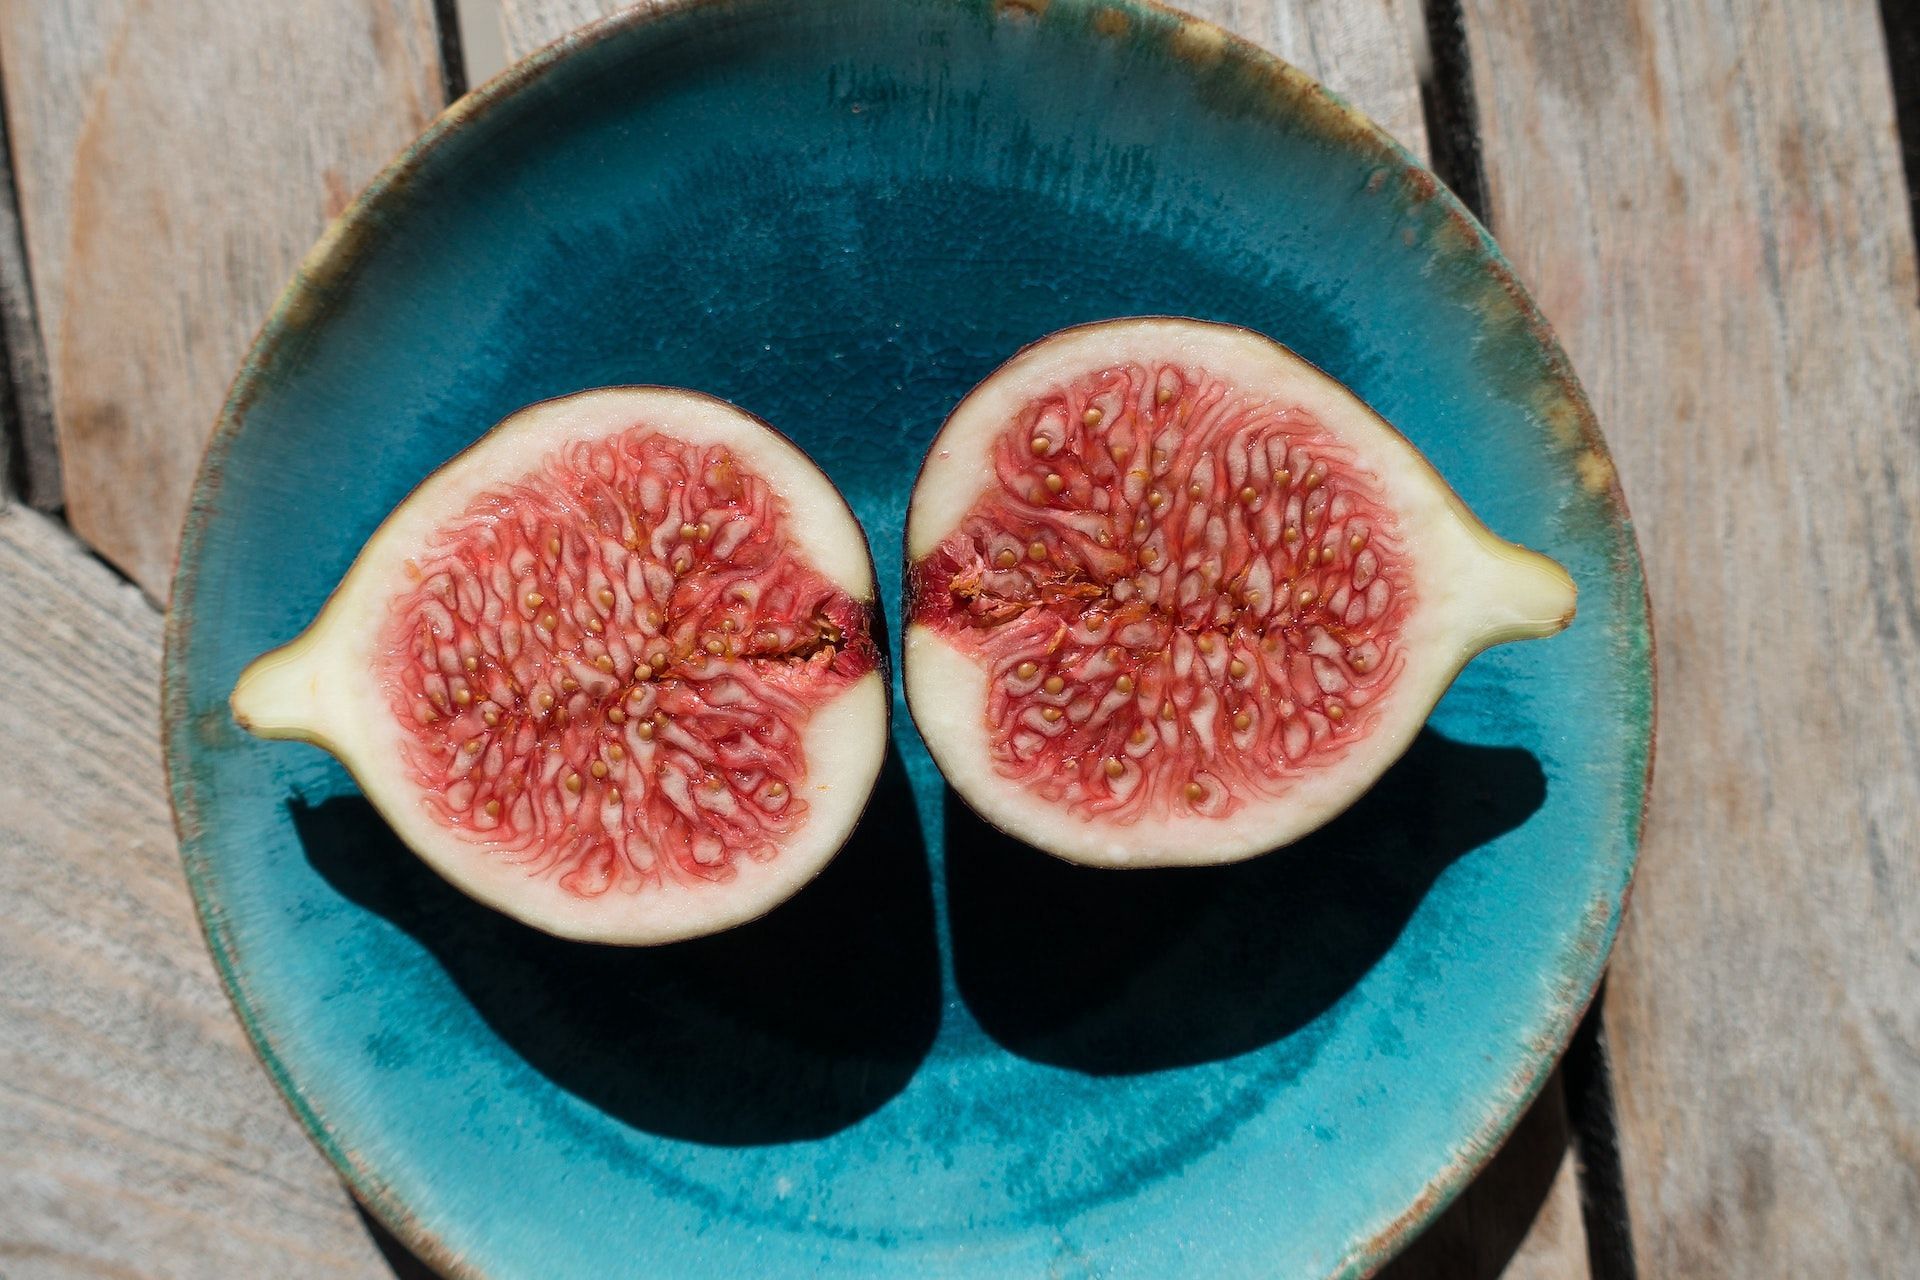 Benefits and nutritional value of figs. (Image via Pexels/ Pixavay)